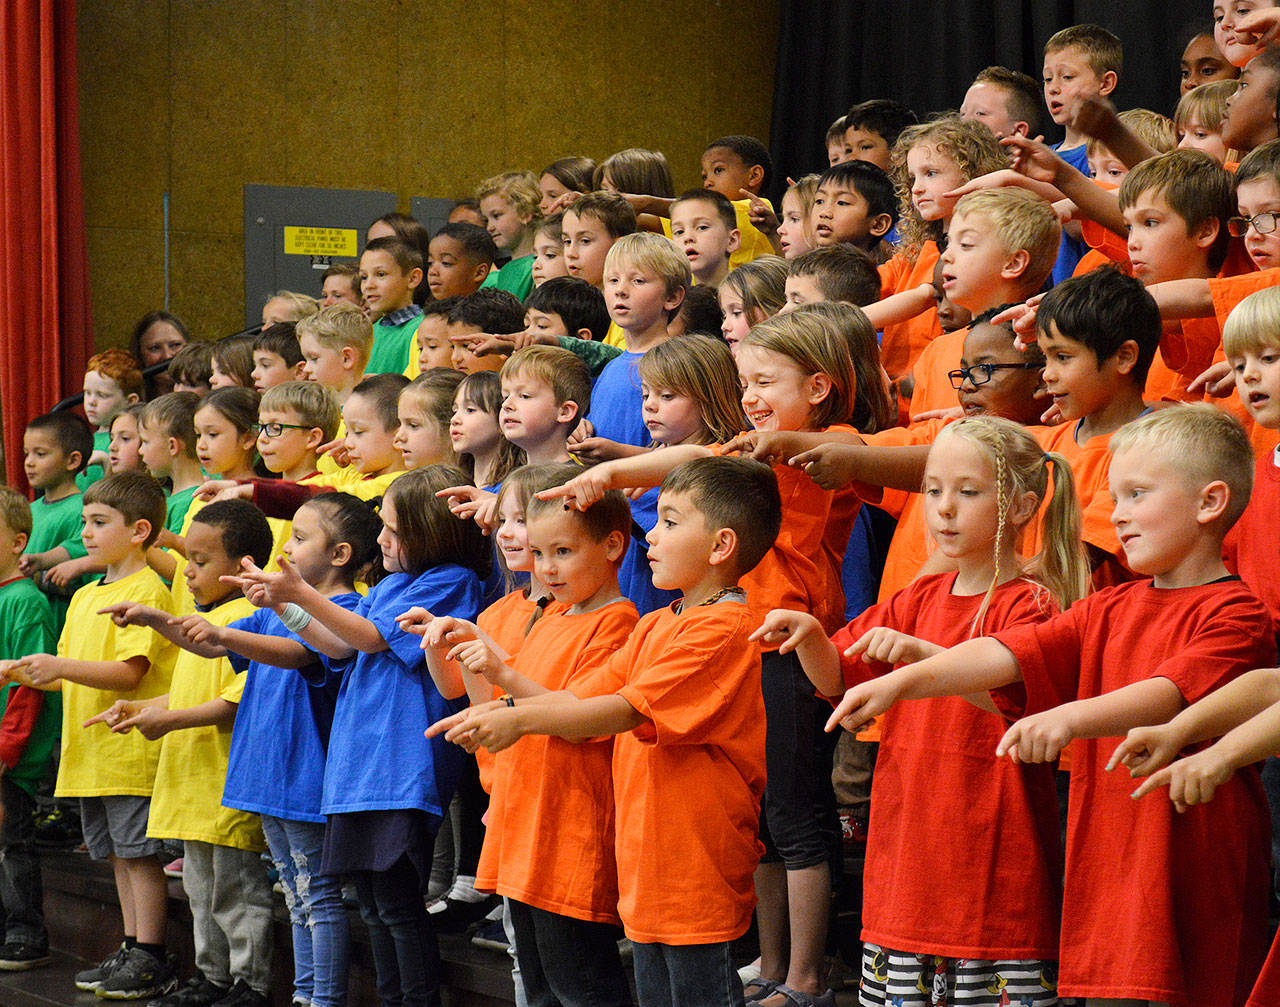 Kindergartners from Crescent Harbor Elementary School point to their teachers as they sing a thank you song during a rehearsal Thursday for the class’s World Music program. Photo by Laura Guido/Whidbey News Group